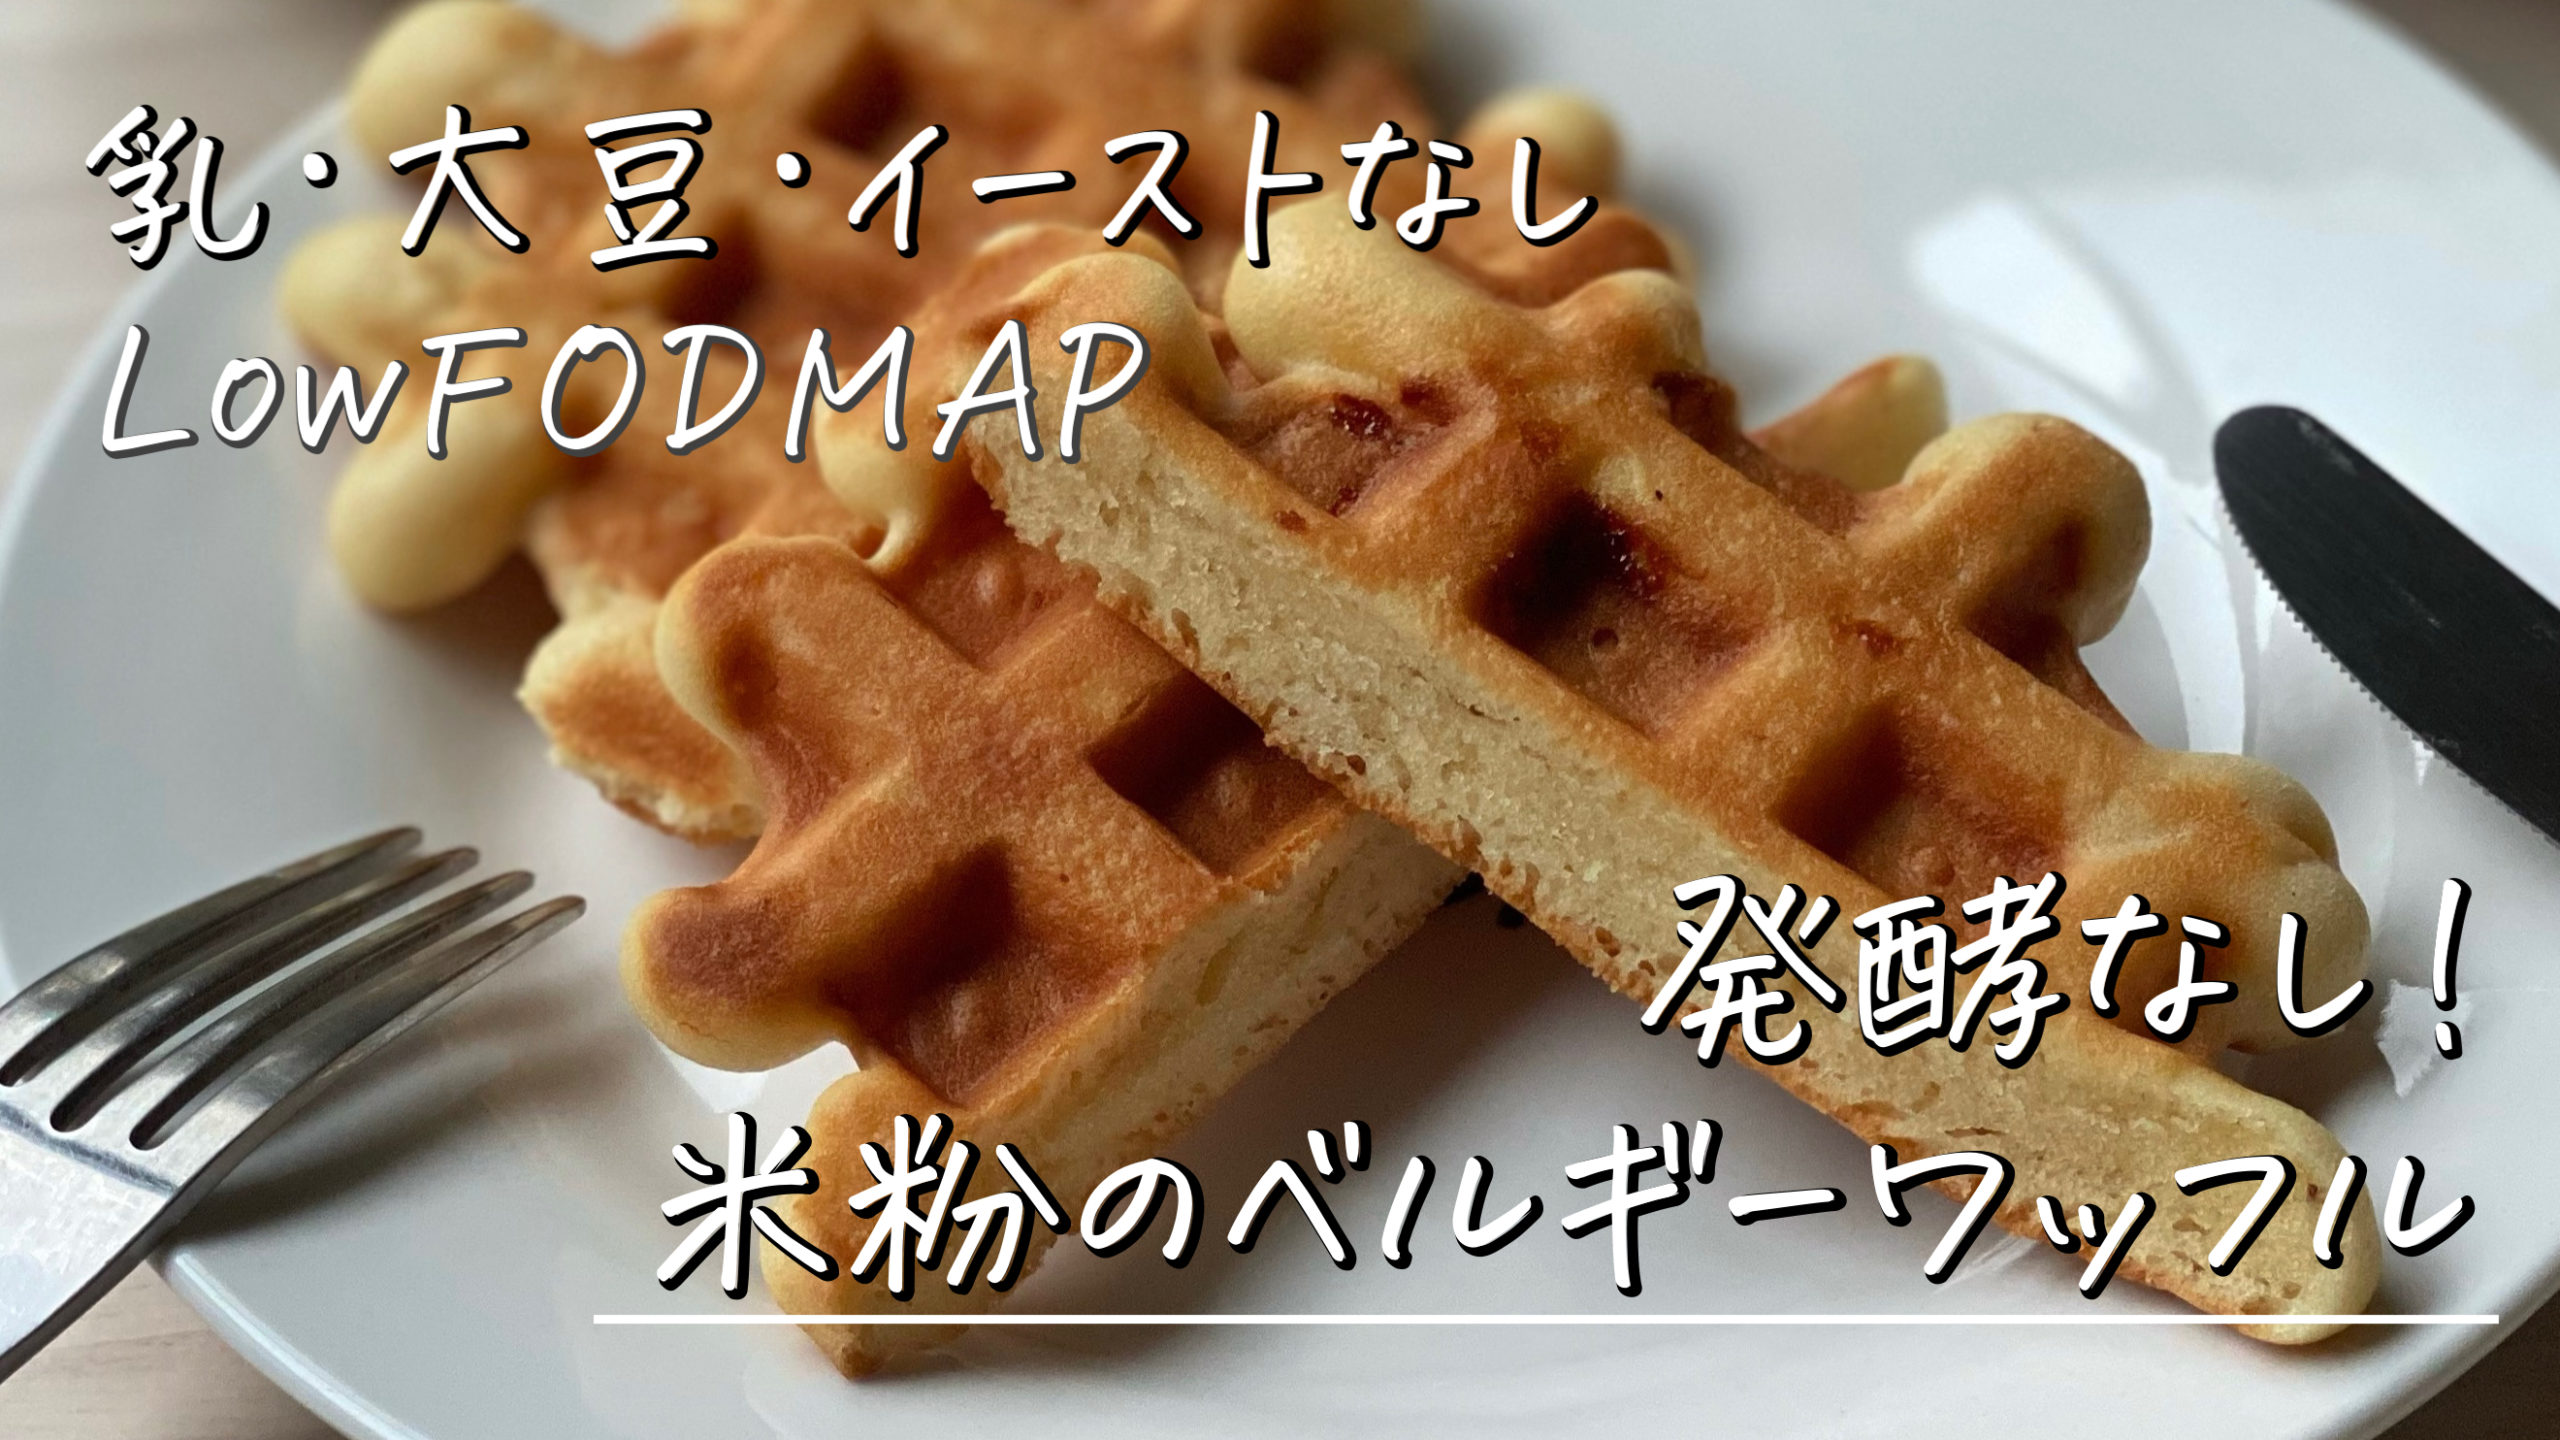 low-fodmap-recipe-of-rice-flour-belgium-waffle-without-milk-and-butter